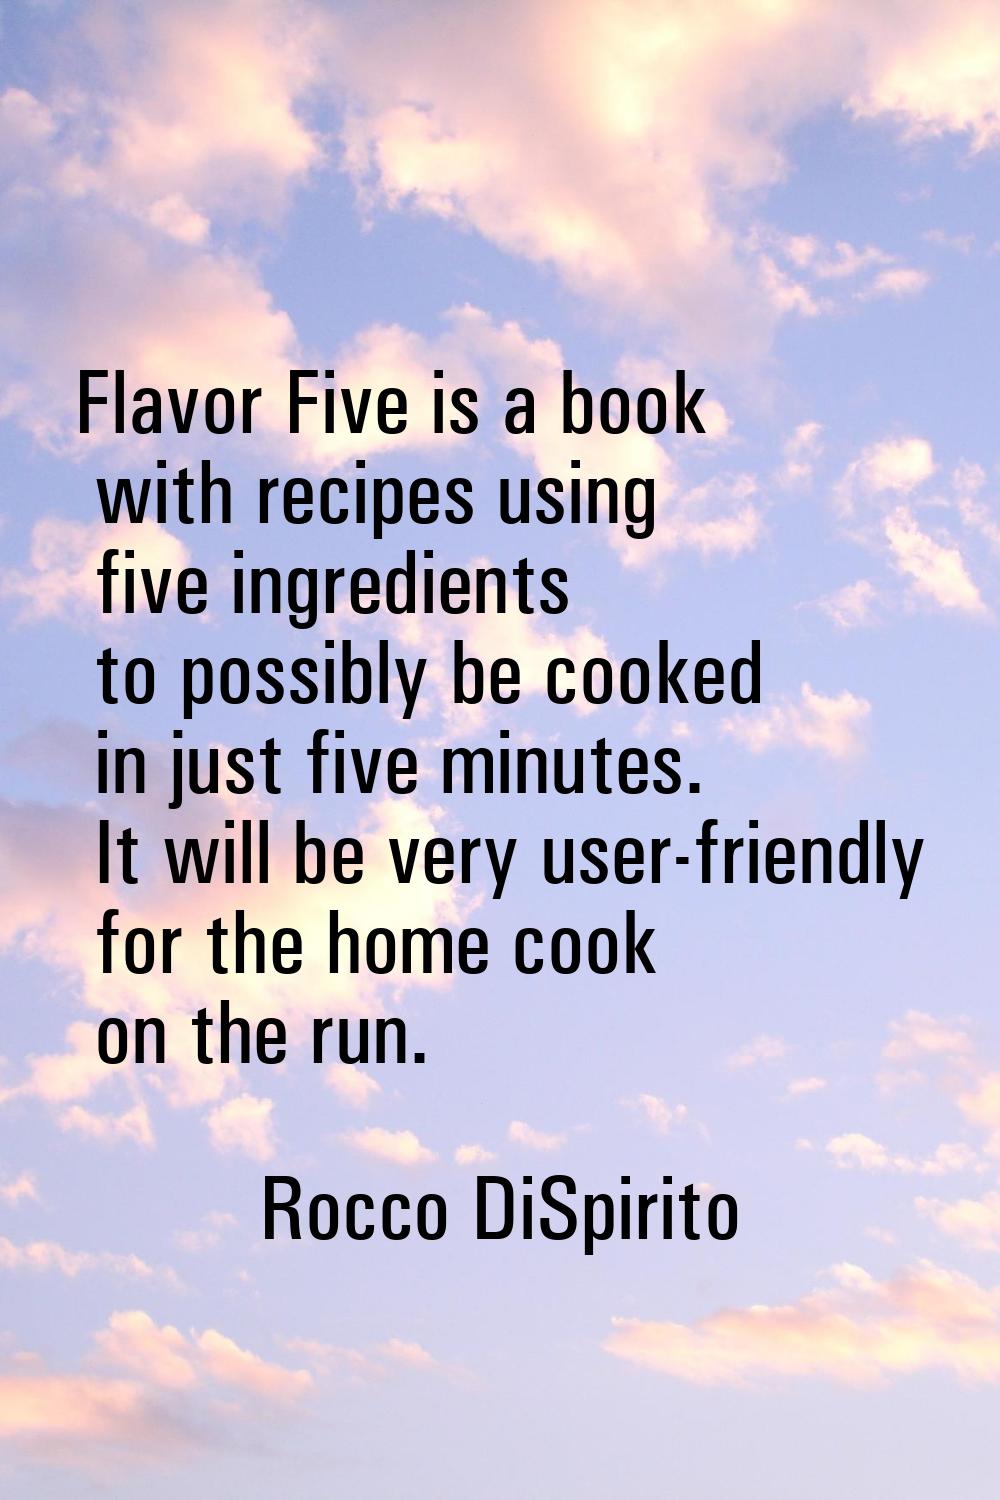 Flavor Five is a book with recipes using five ingredients to possibly be cooked in just five minute